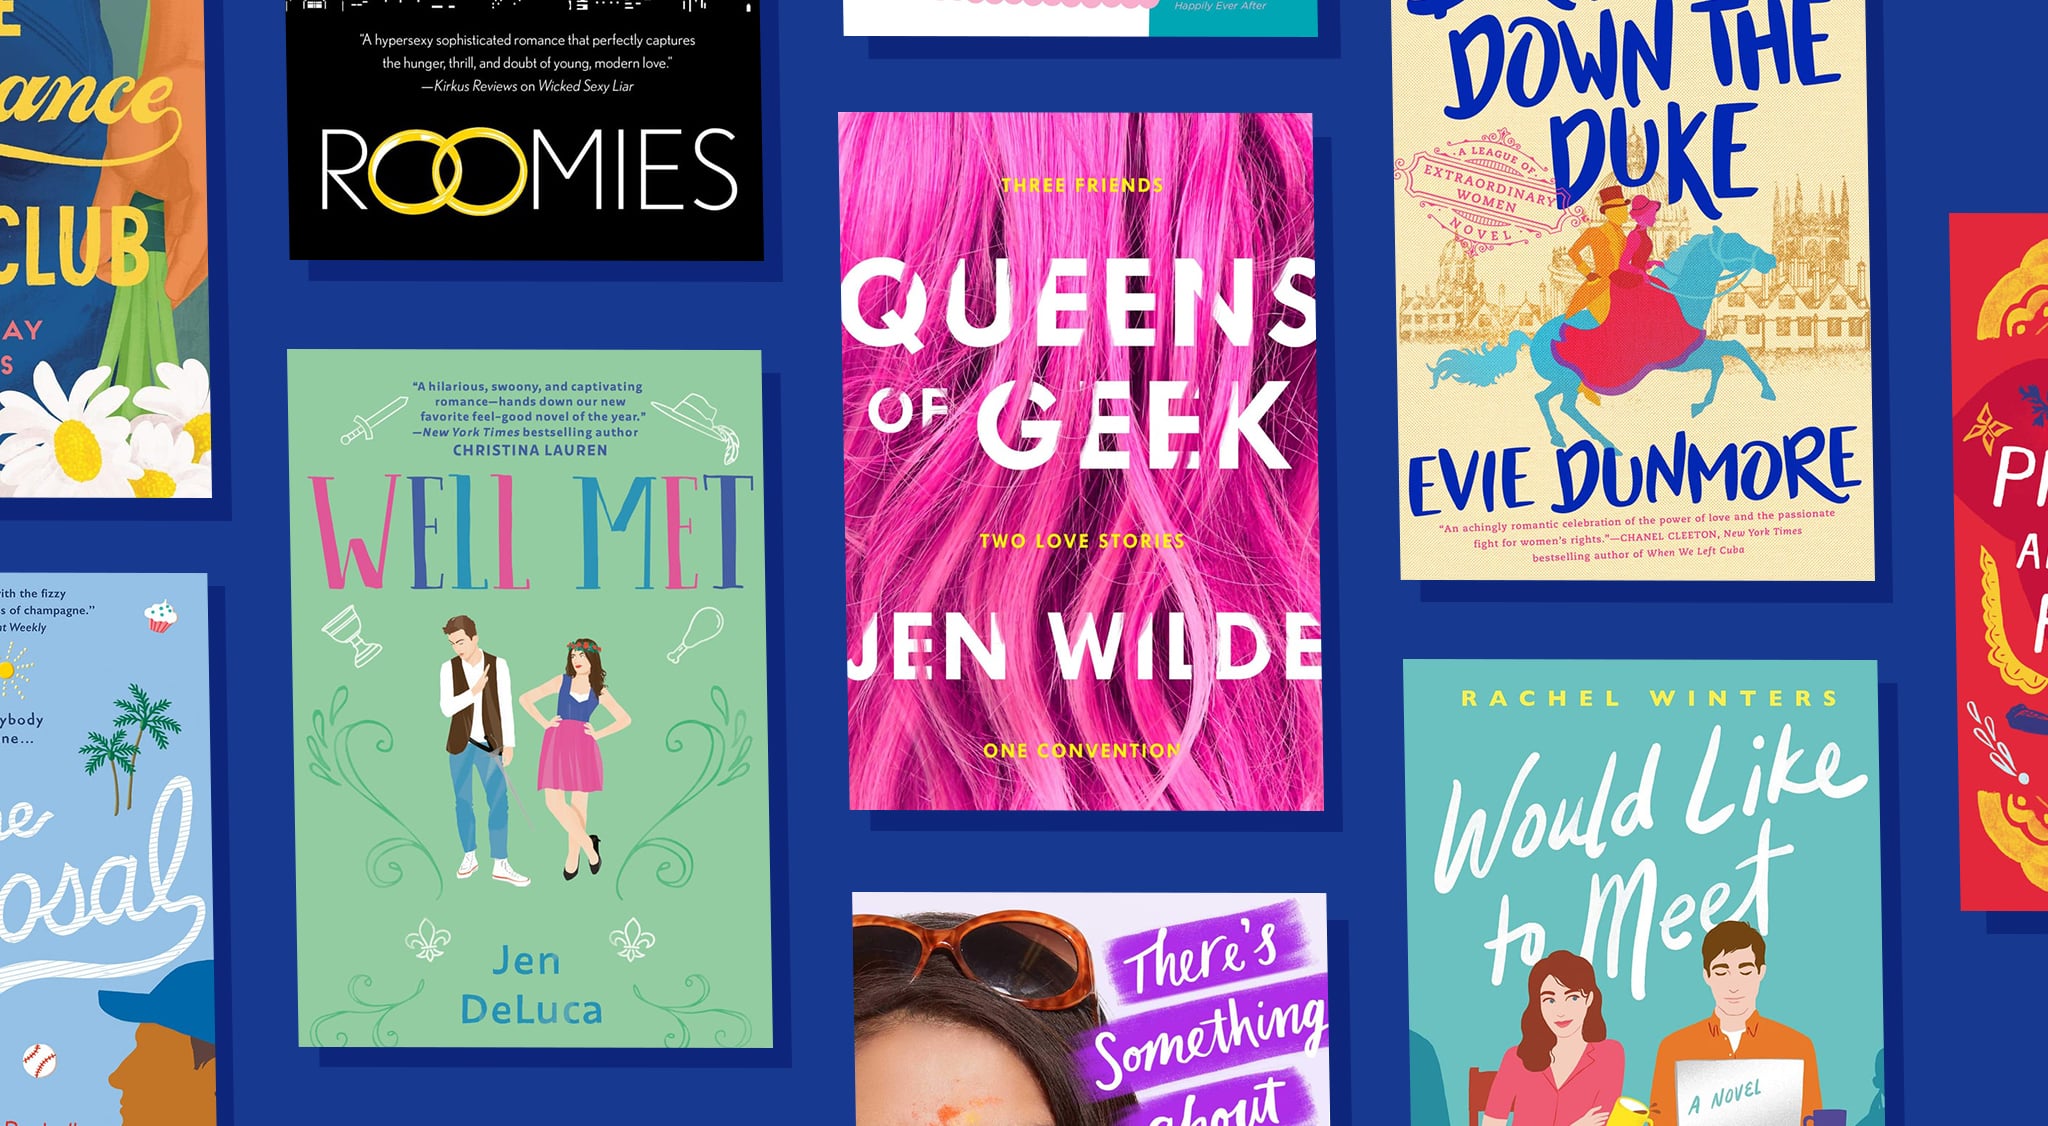 35 Hilarious Romcom Books That Will Have You Laughing Out Loud – She Reads  Romance Books